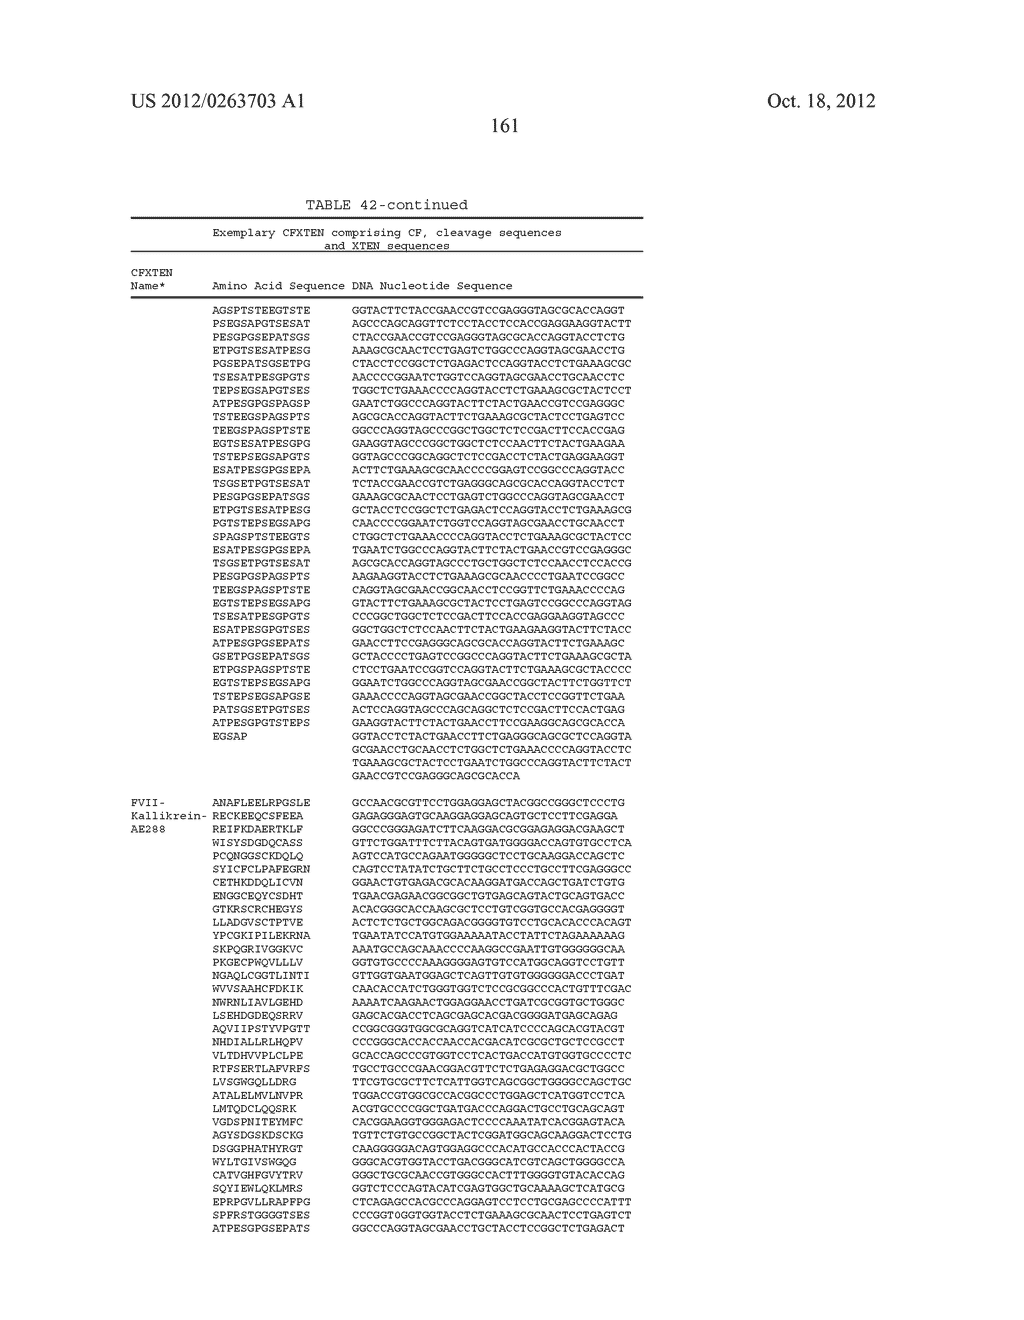 COAGULATION FACTOR IX COMPOSITIONS AND METHODS OF MAKING AND USING SAME - diagram, schematic, and image 198